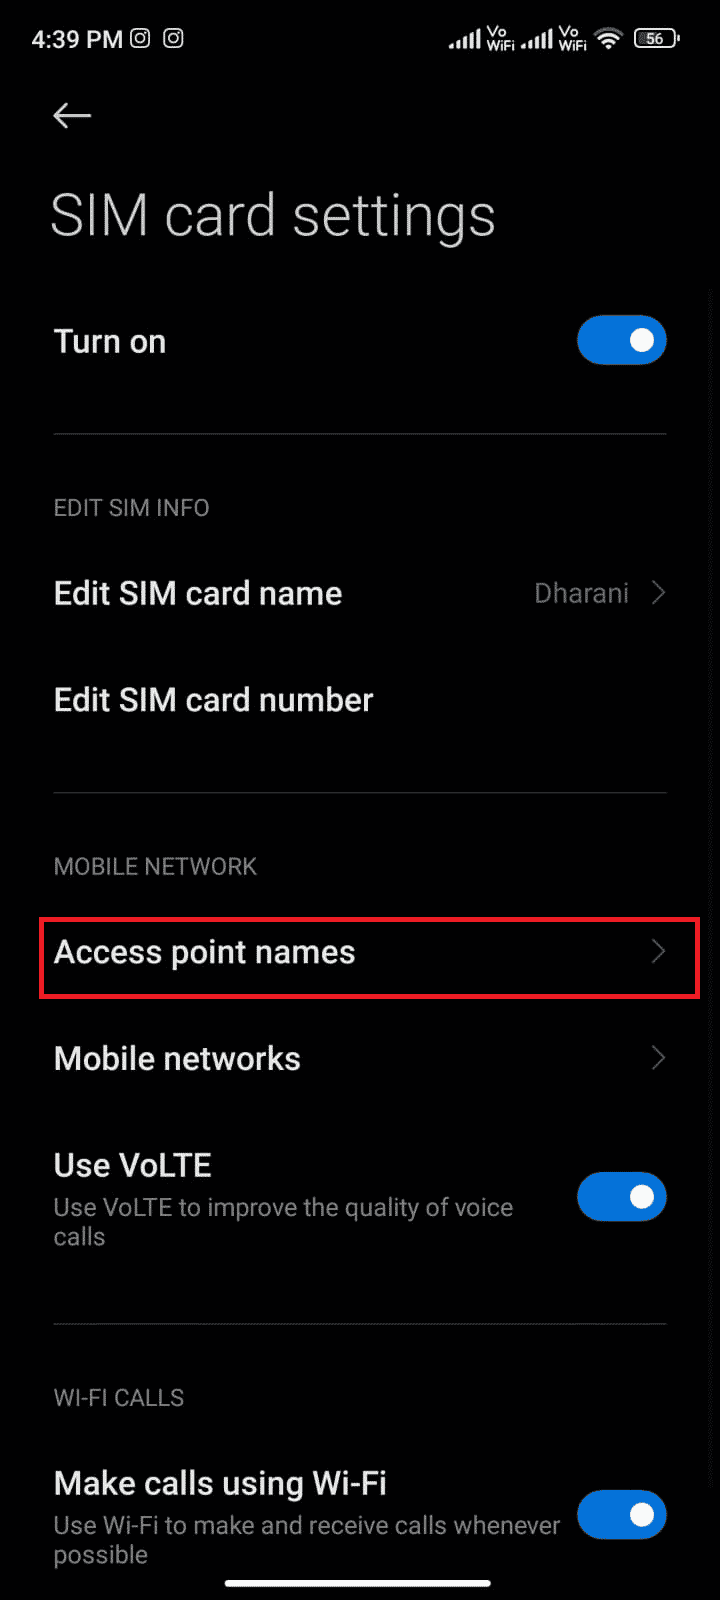 Then, tap on Access point names | Fix Google Play Error Code 495 on Android